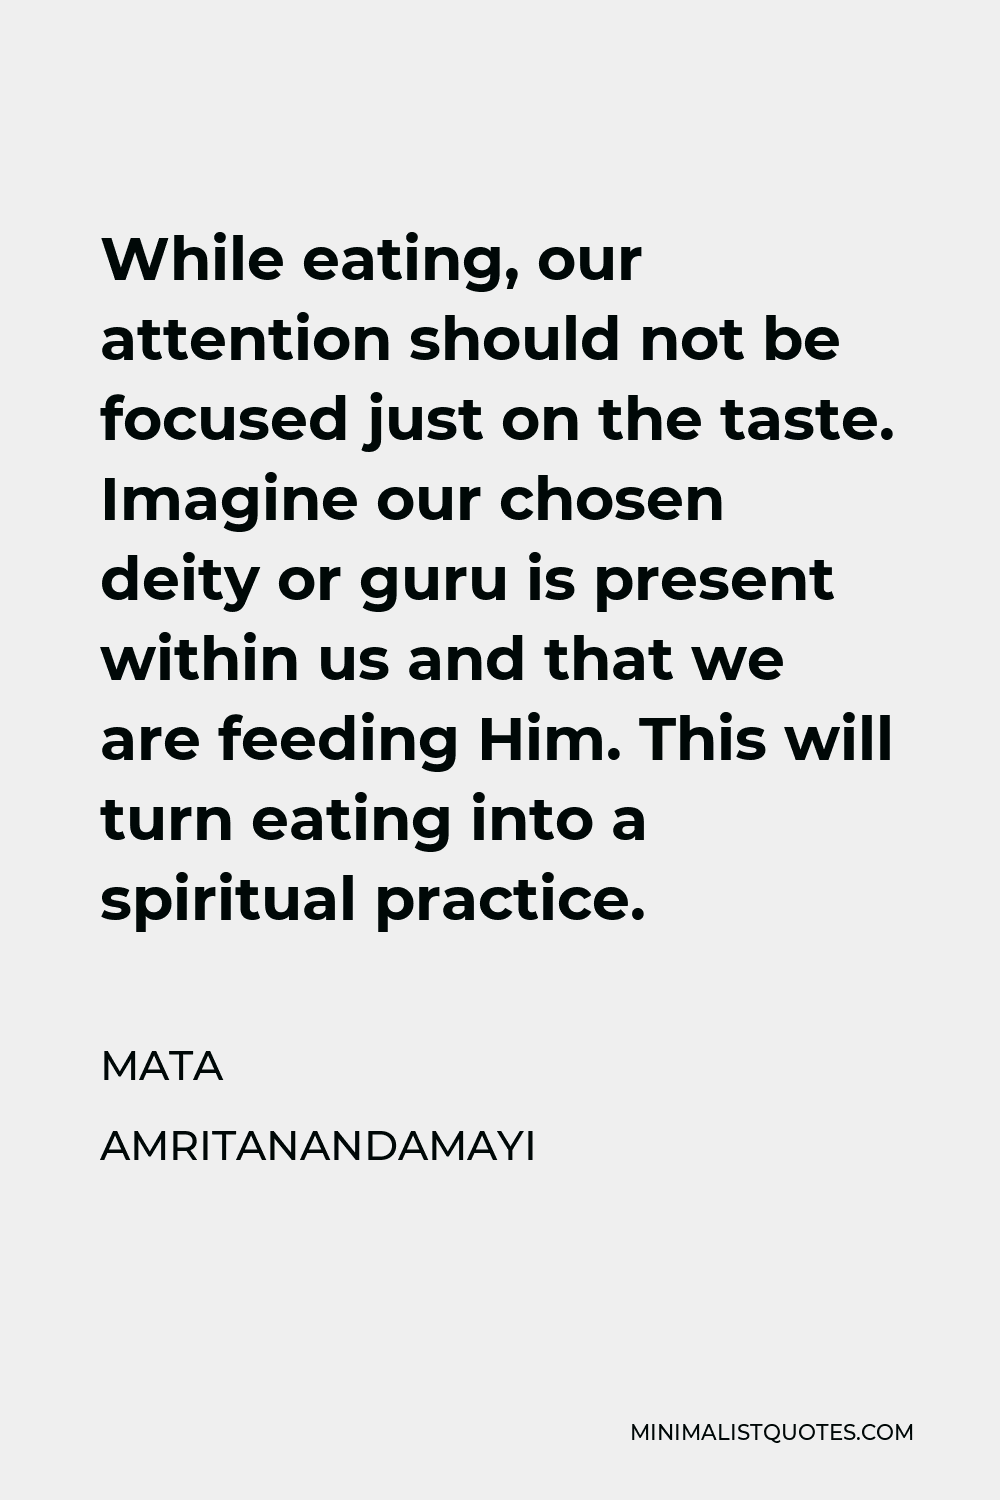 Mata Amritanandamayi Quote - While eating, our attention should not be focused just on the taste. Imagine our chosen deity or guru is present within us and that we are feeding Him. This will turn eating into a spiritual practice.